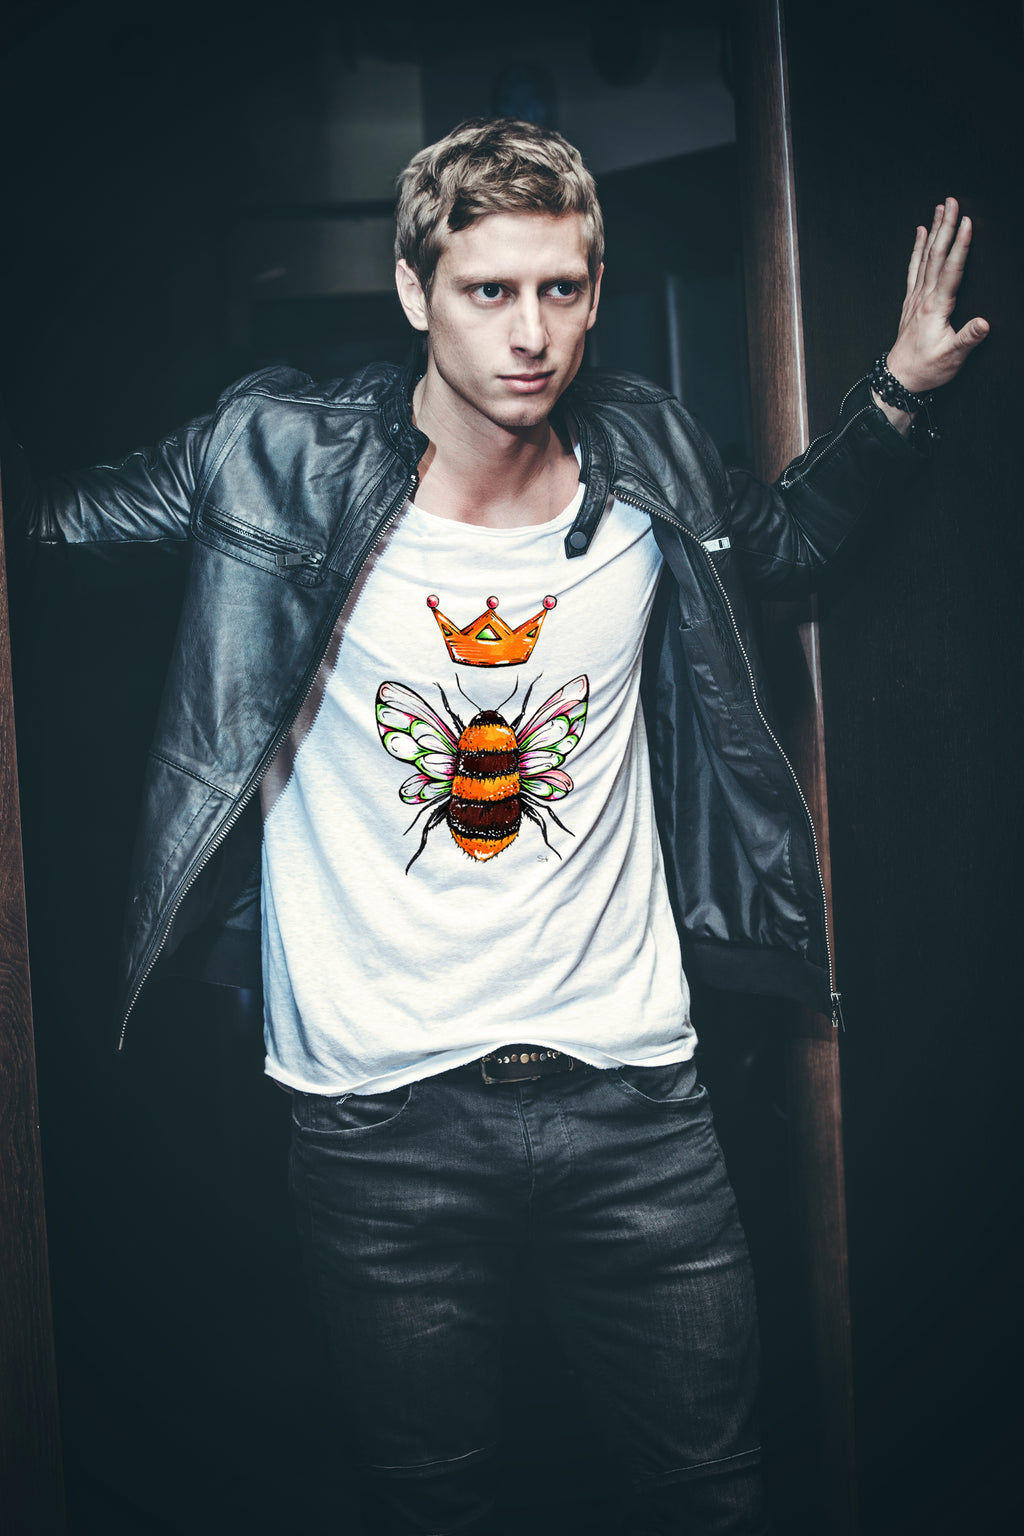 Queen Bee - Mens T-Shirt - Artwork by the Very Talented Artist Sarah Neville - Made to Order